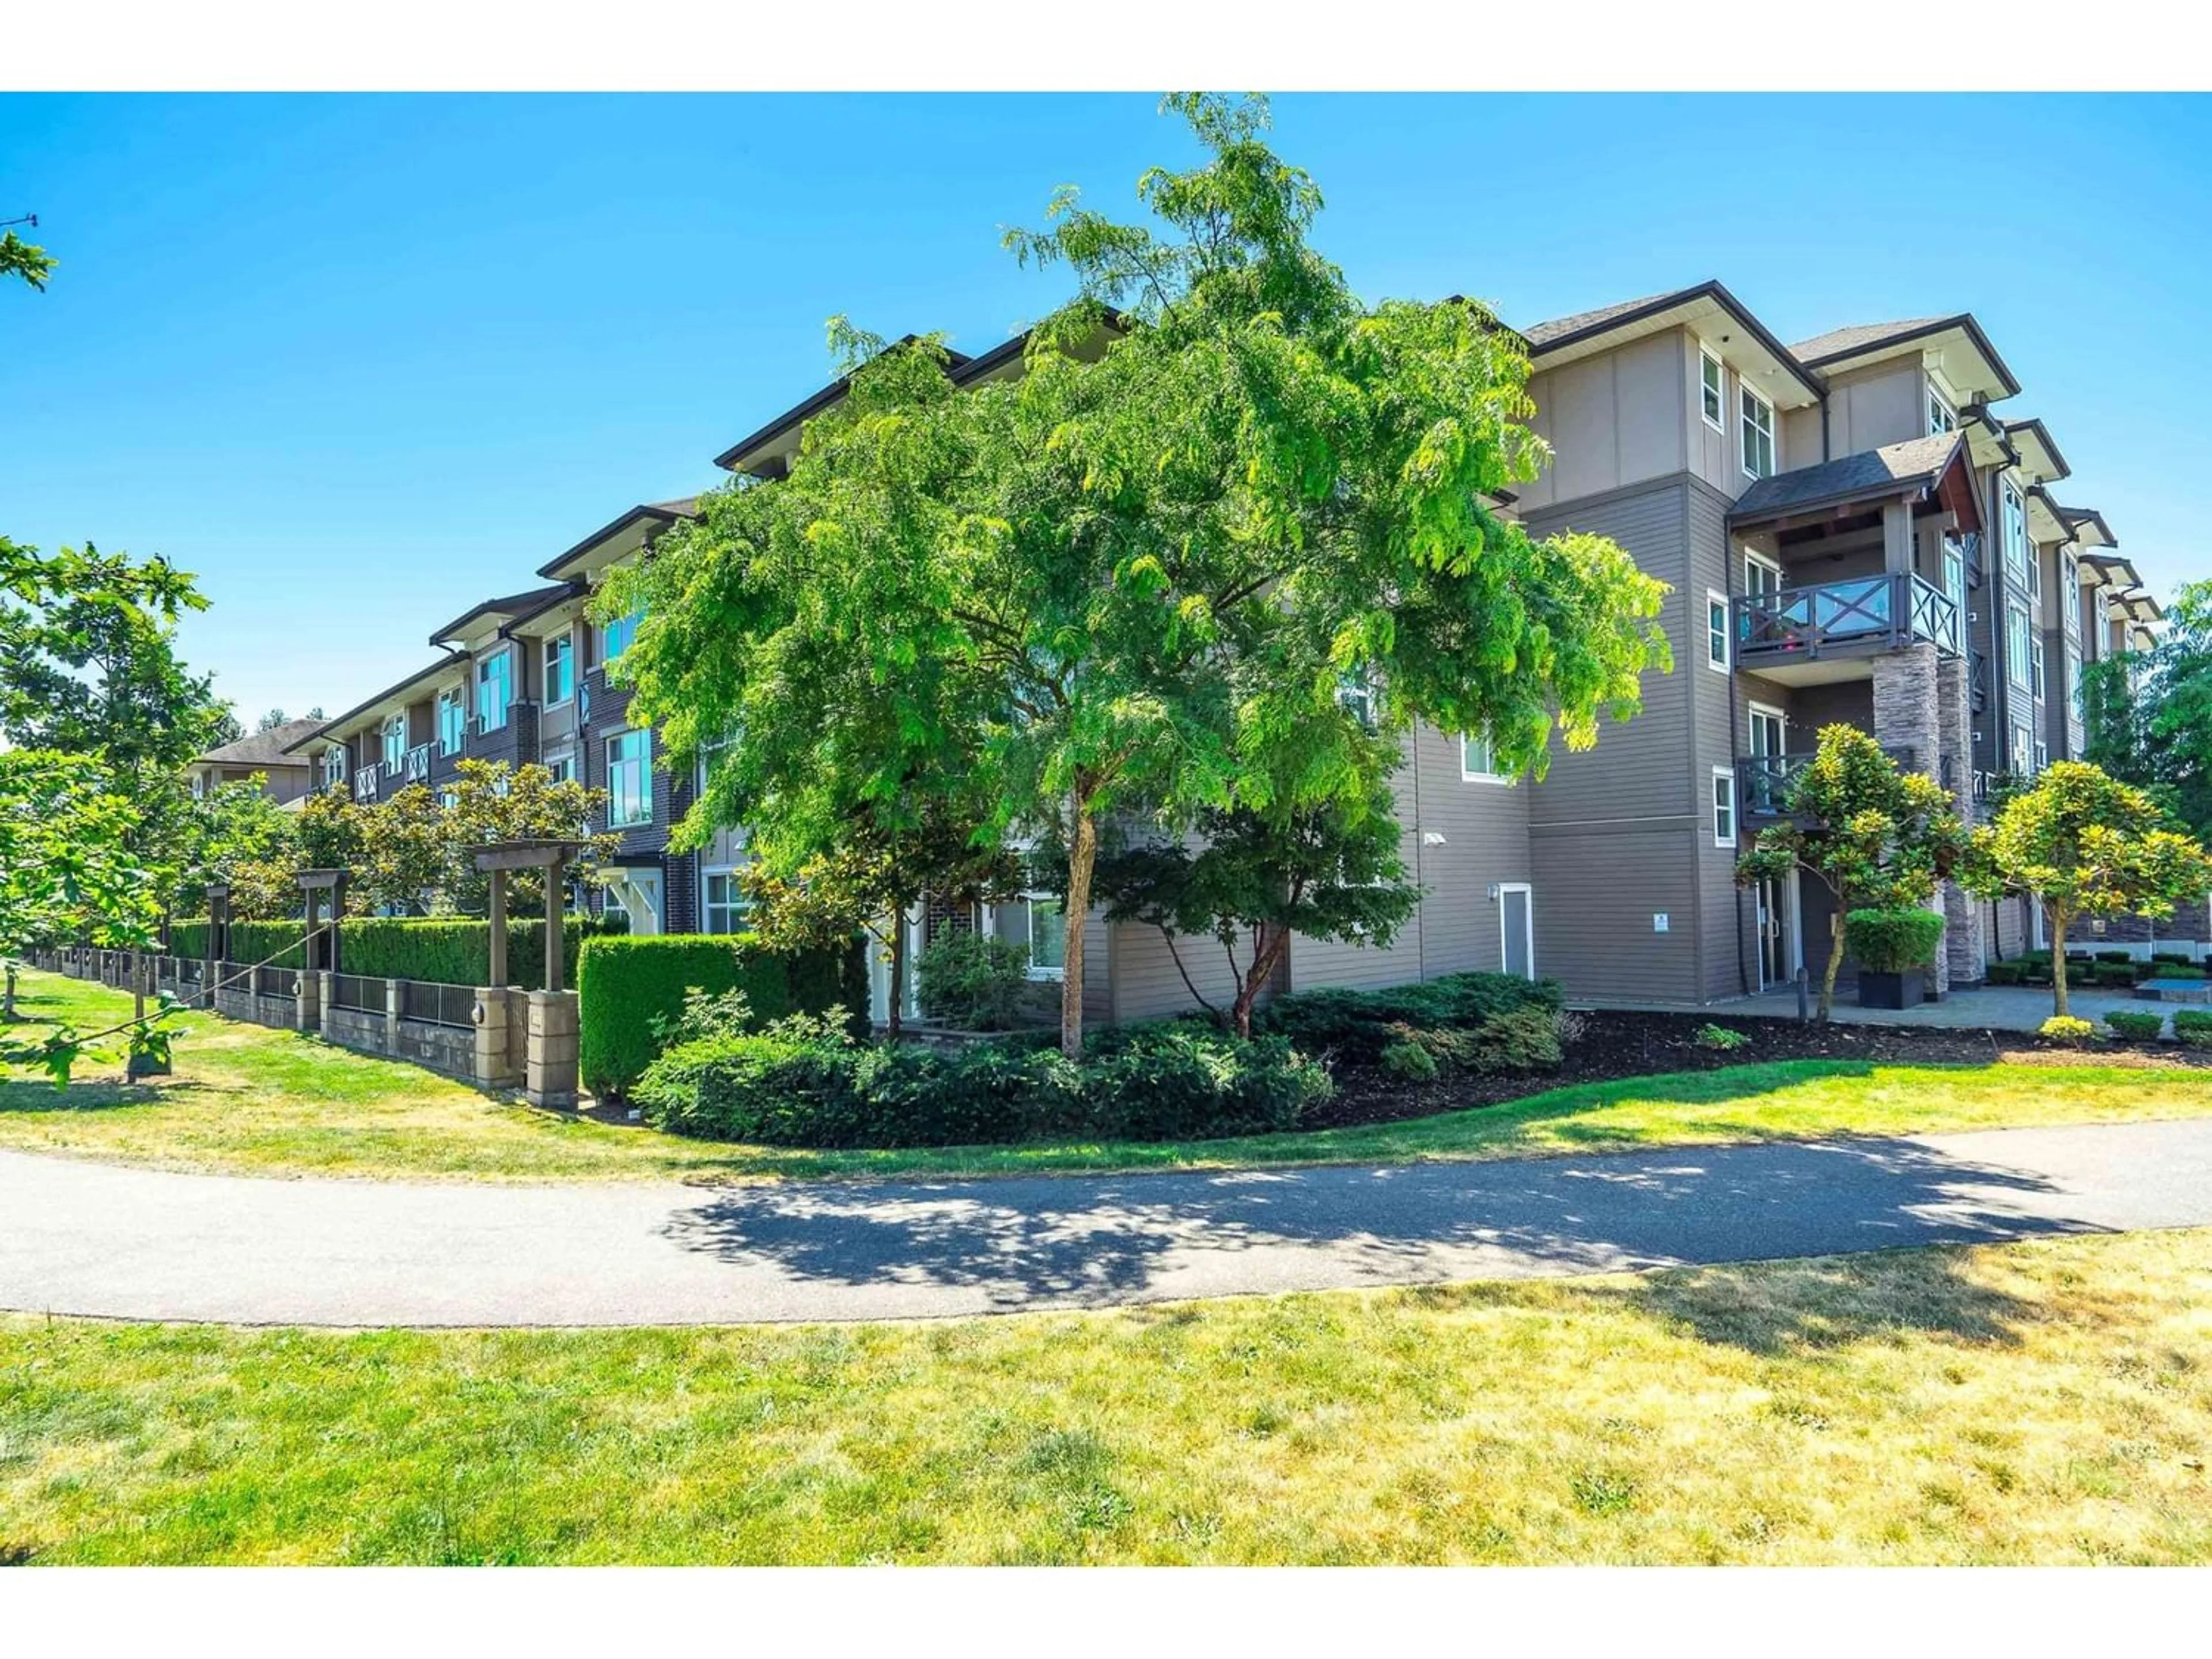 A pic from exterior of the house or condo for 410 18818 68TH AVE AVENUE, Surrey British Columbia V4N6K2